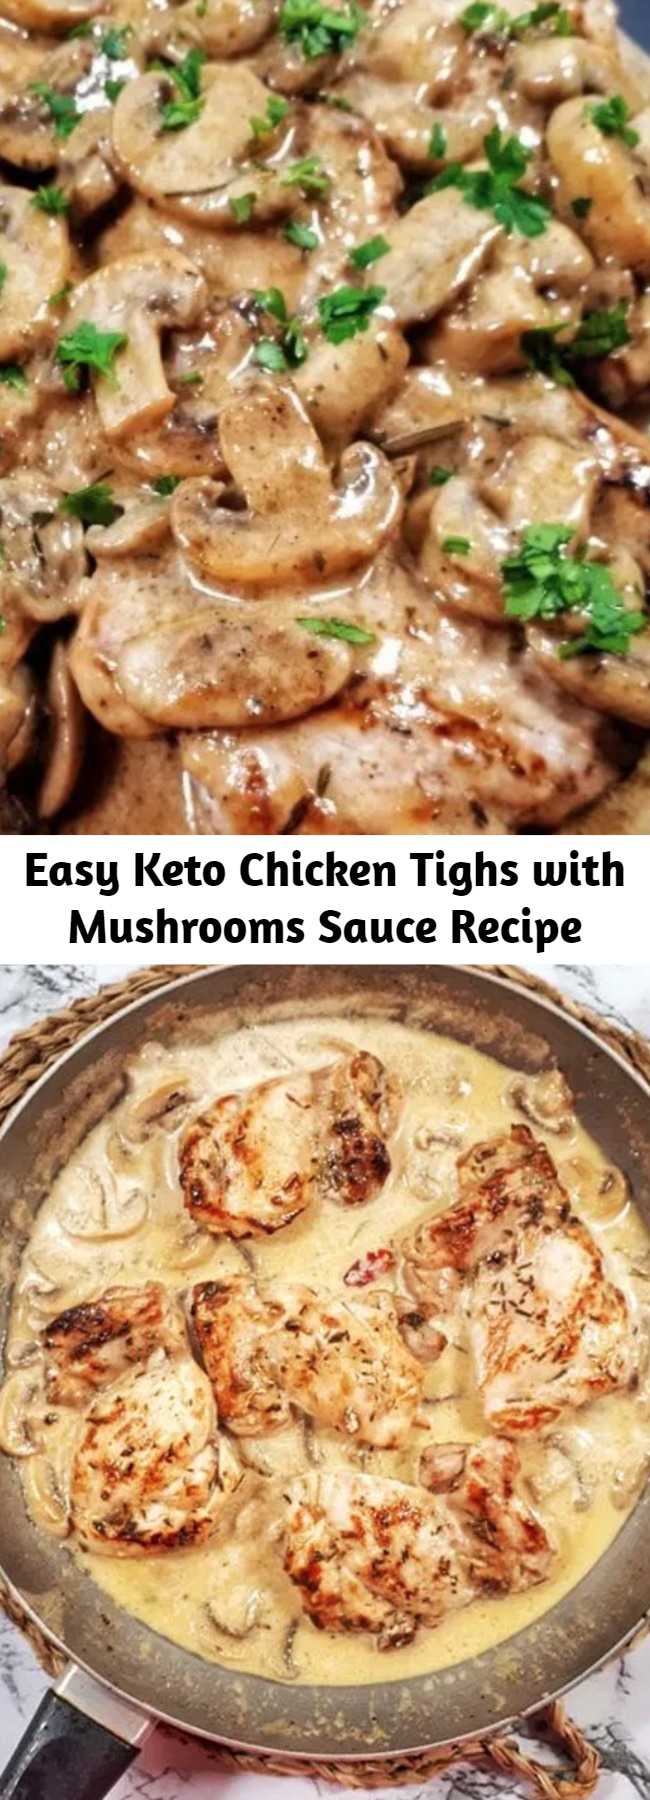 Easy Keto Chicken Tighs with Mushrooms Sauce Recipe - These boneless and skinless chicken thighs with mushrooms sauce is an easy, quick and keto recipe that´s deliciously creamy, and all made in one skillet.